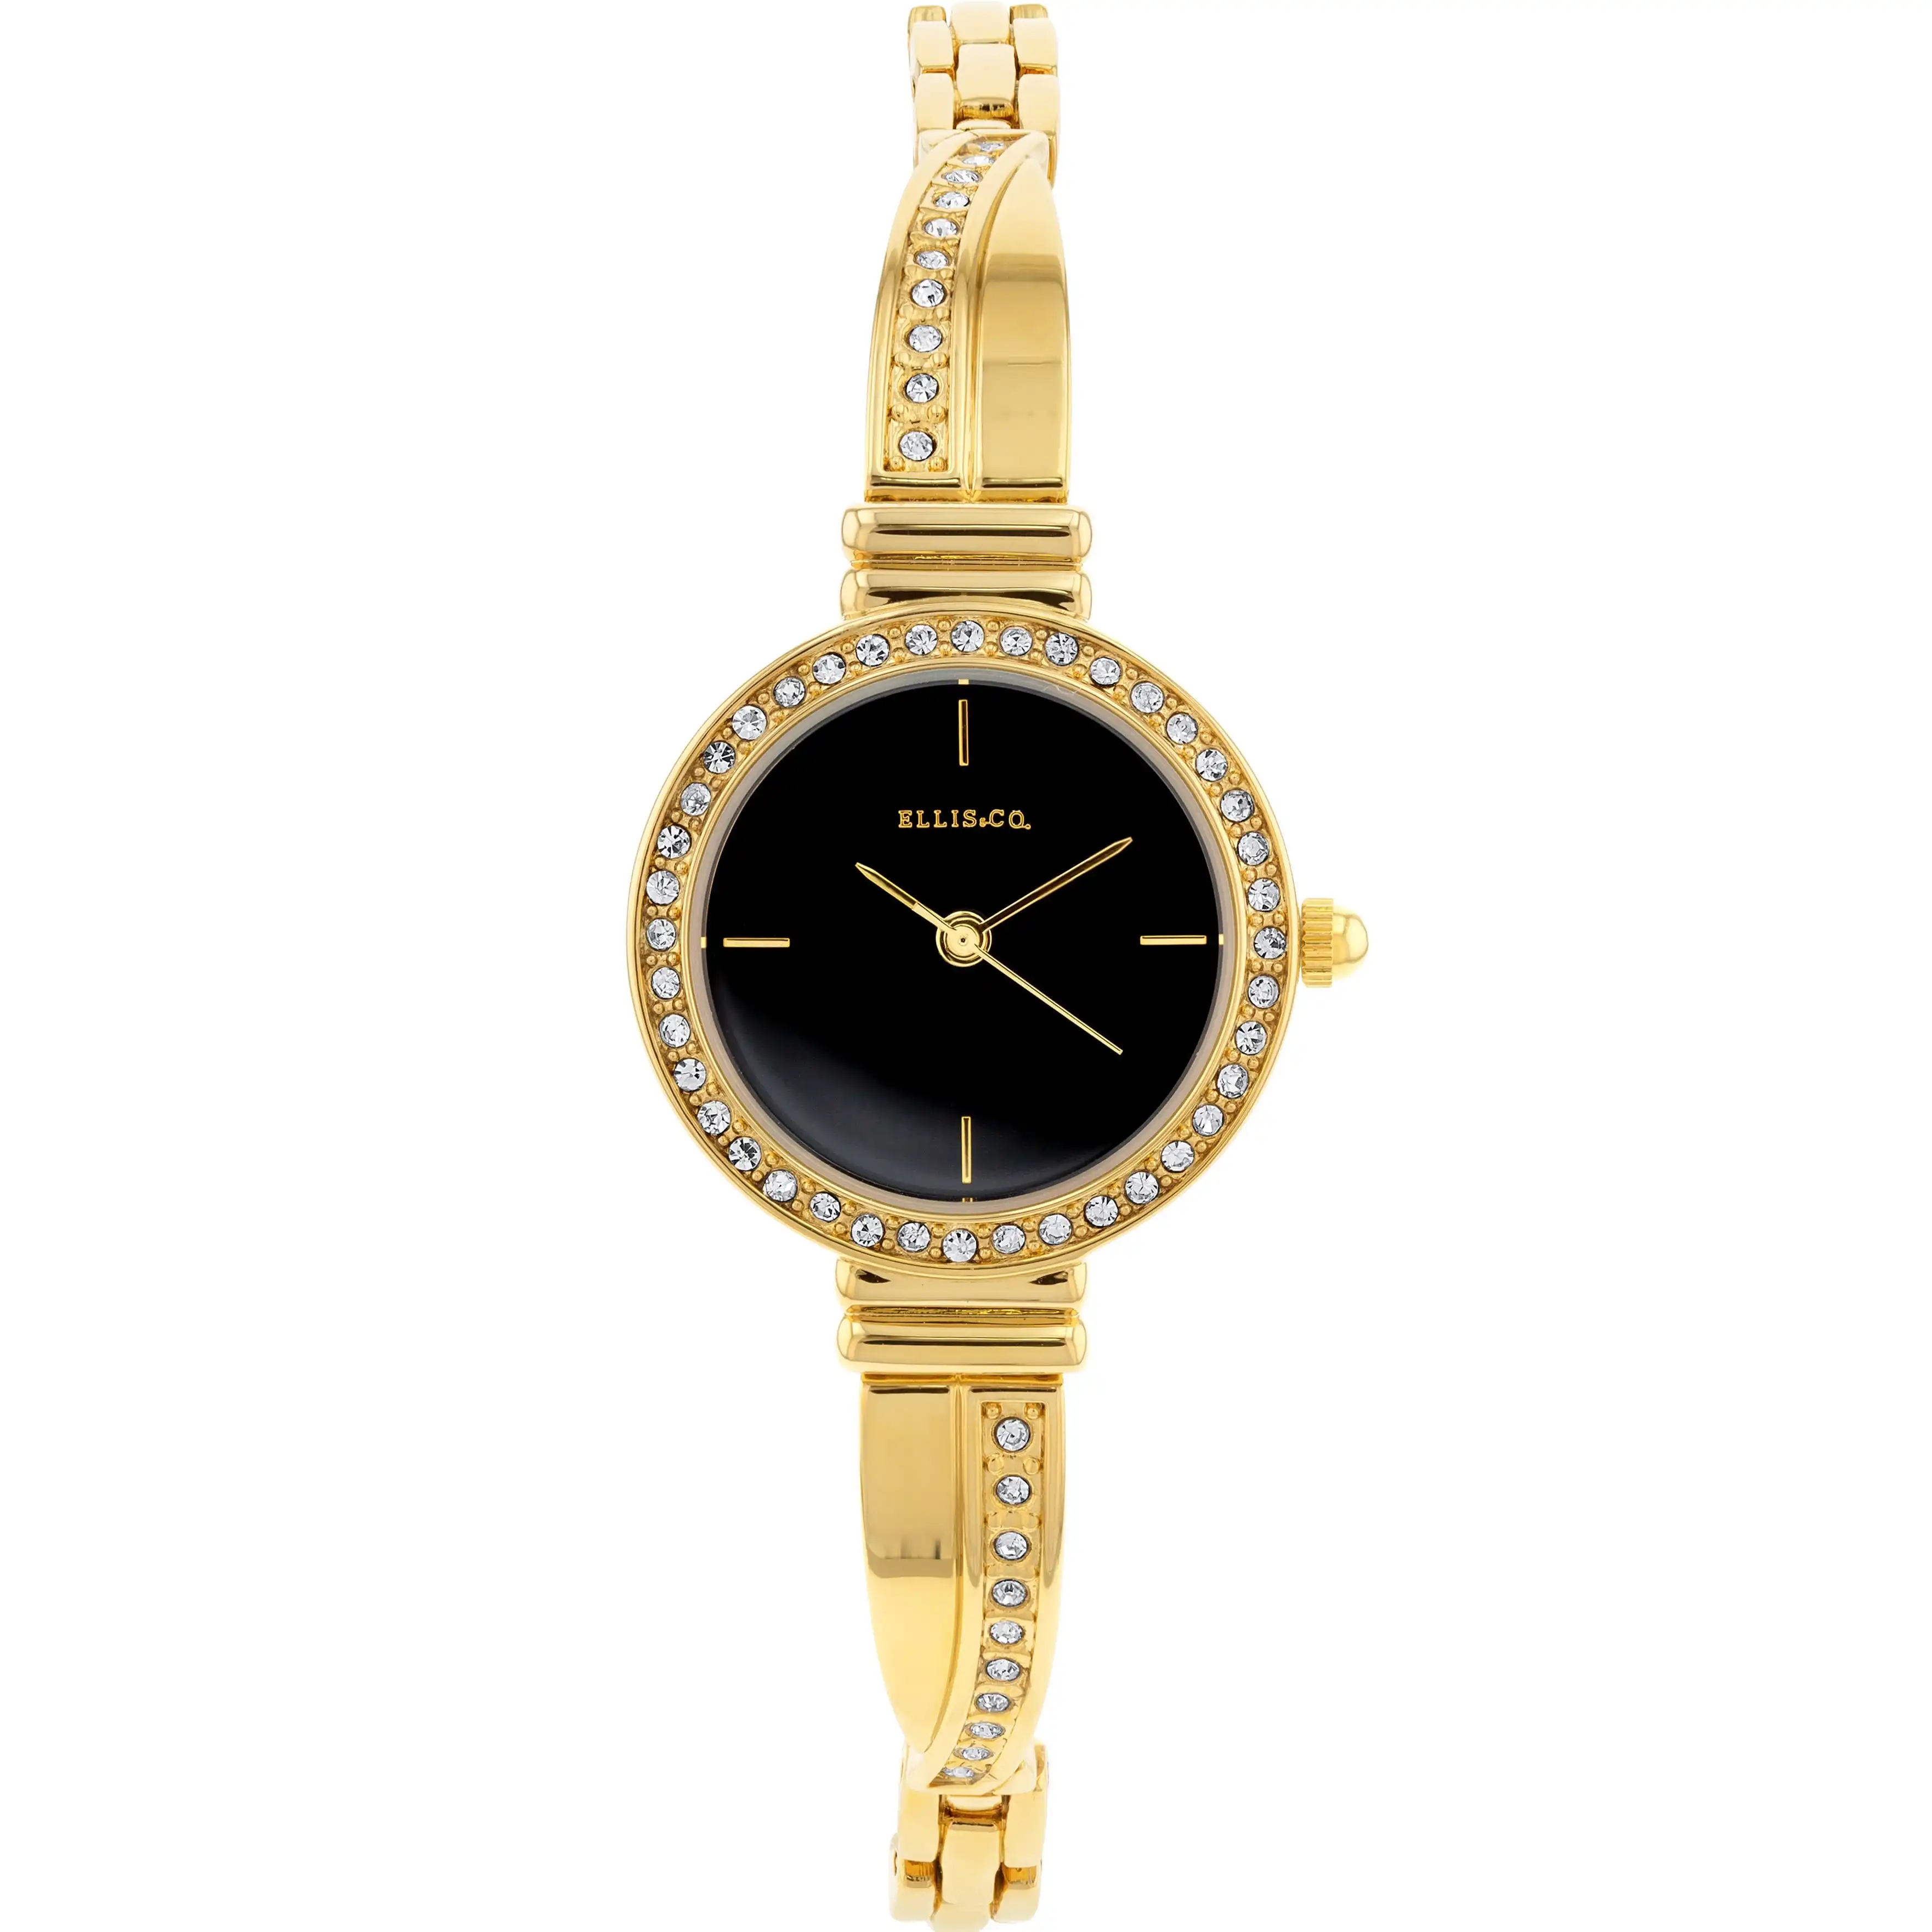 Ellis & Co ' Erika' Gold Plated With Crystal Stones Women's Watch